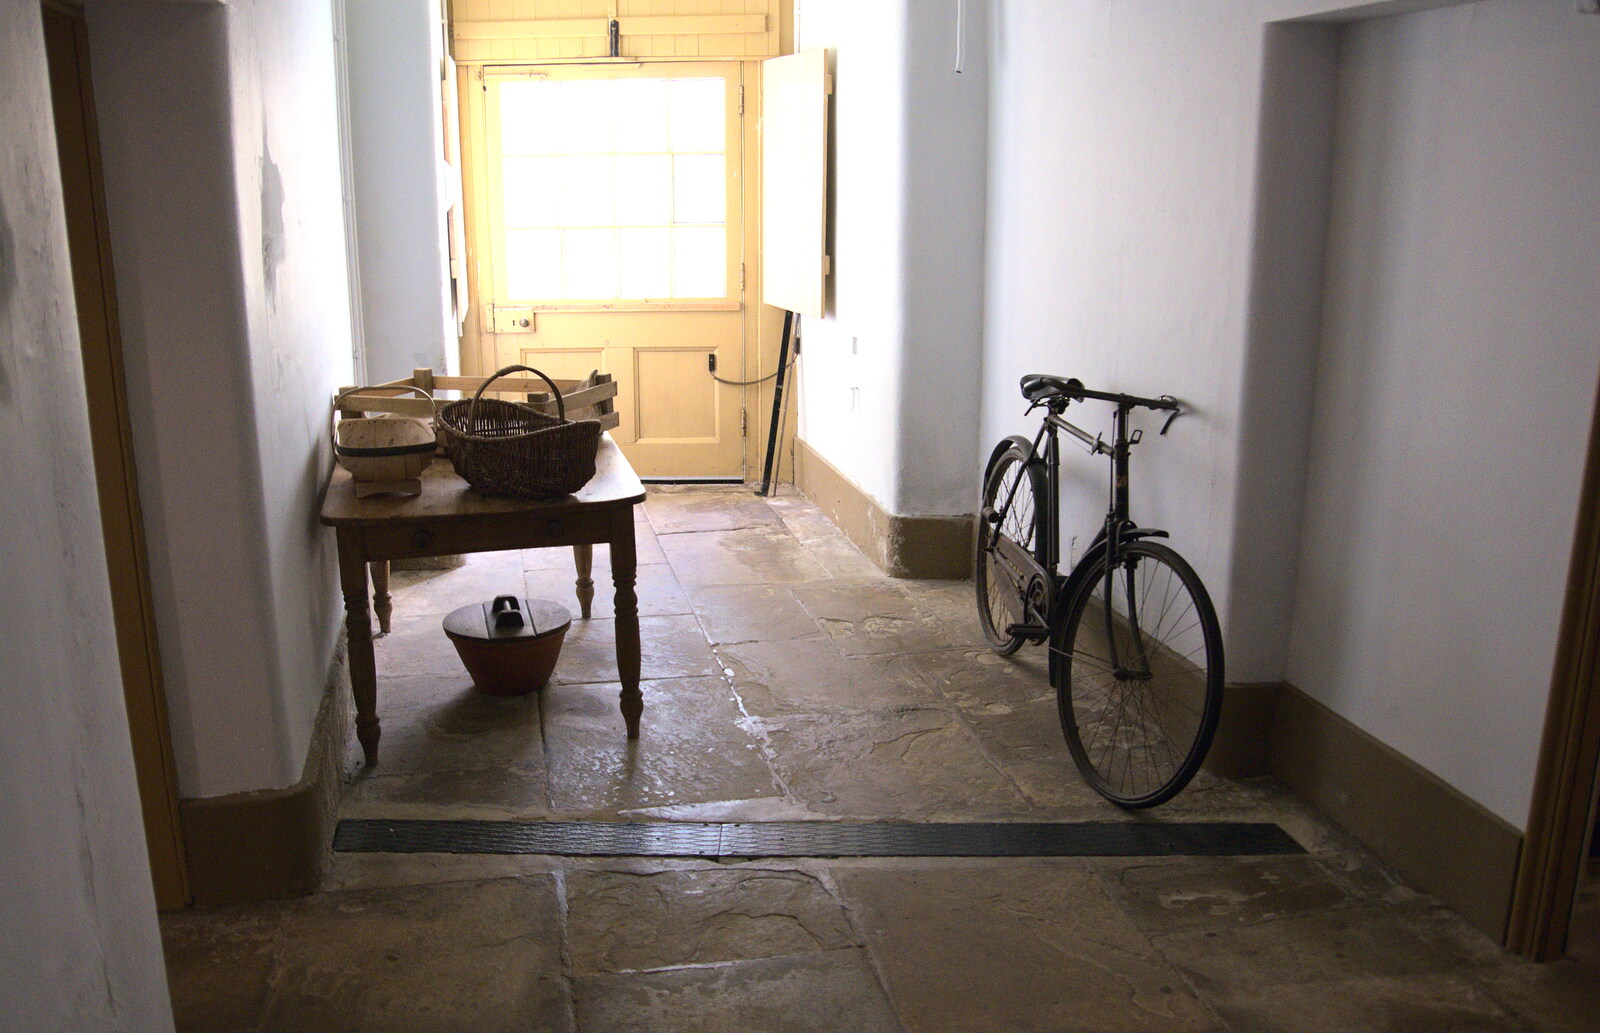 A 1920s bike leans on a wall from Life Below Stairs, Ickworth House, Horringer, Suffolk - 28th January 2018